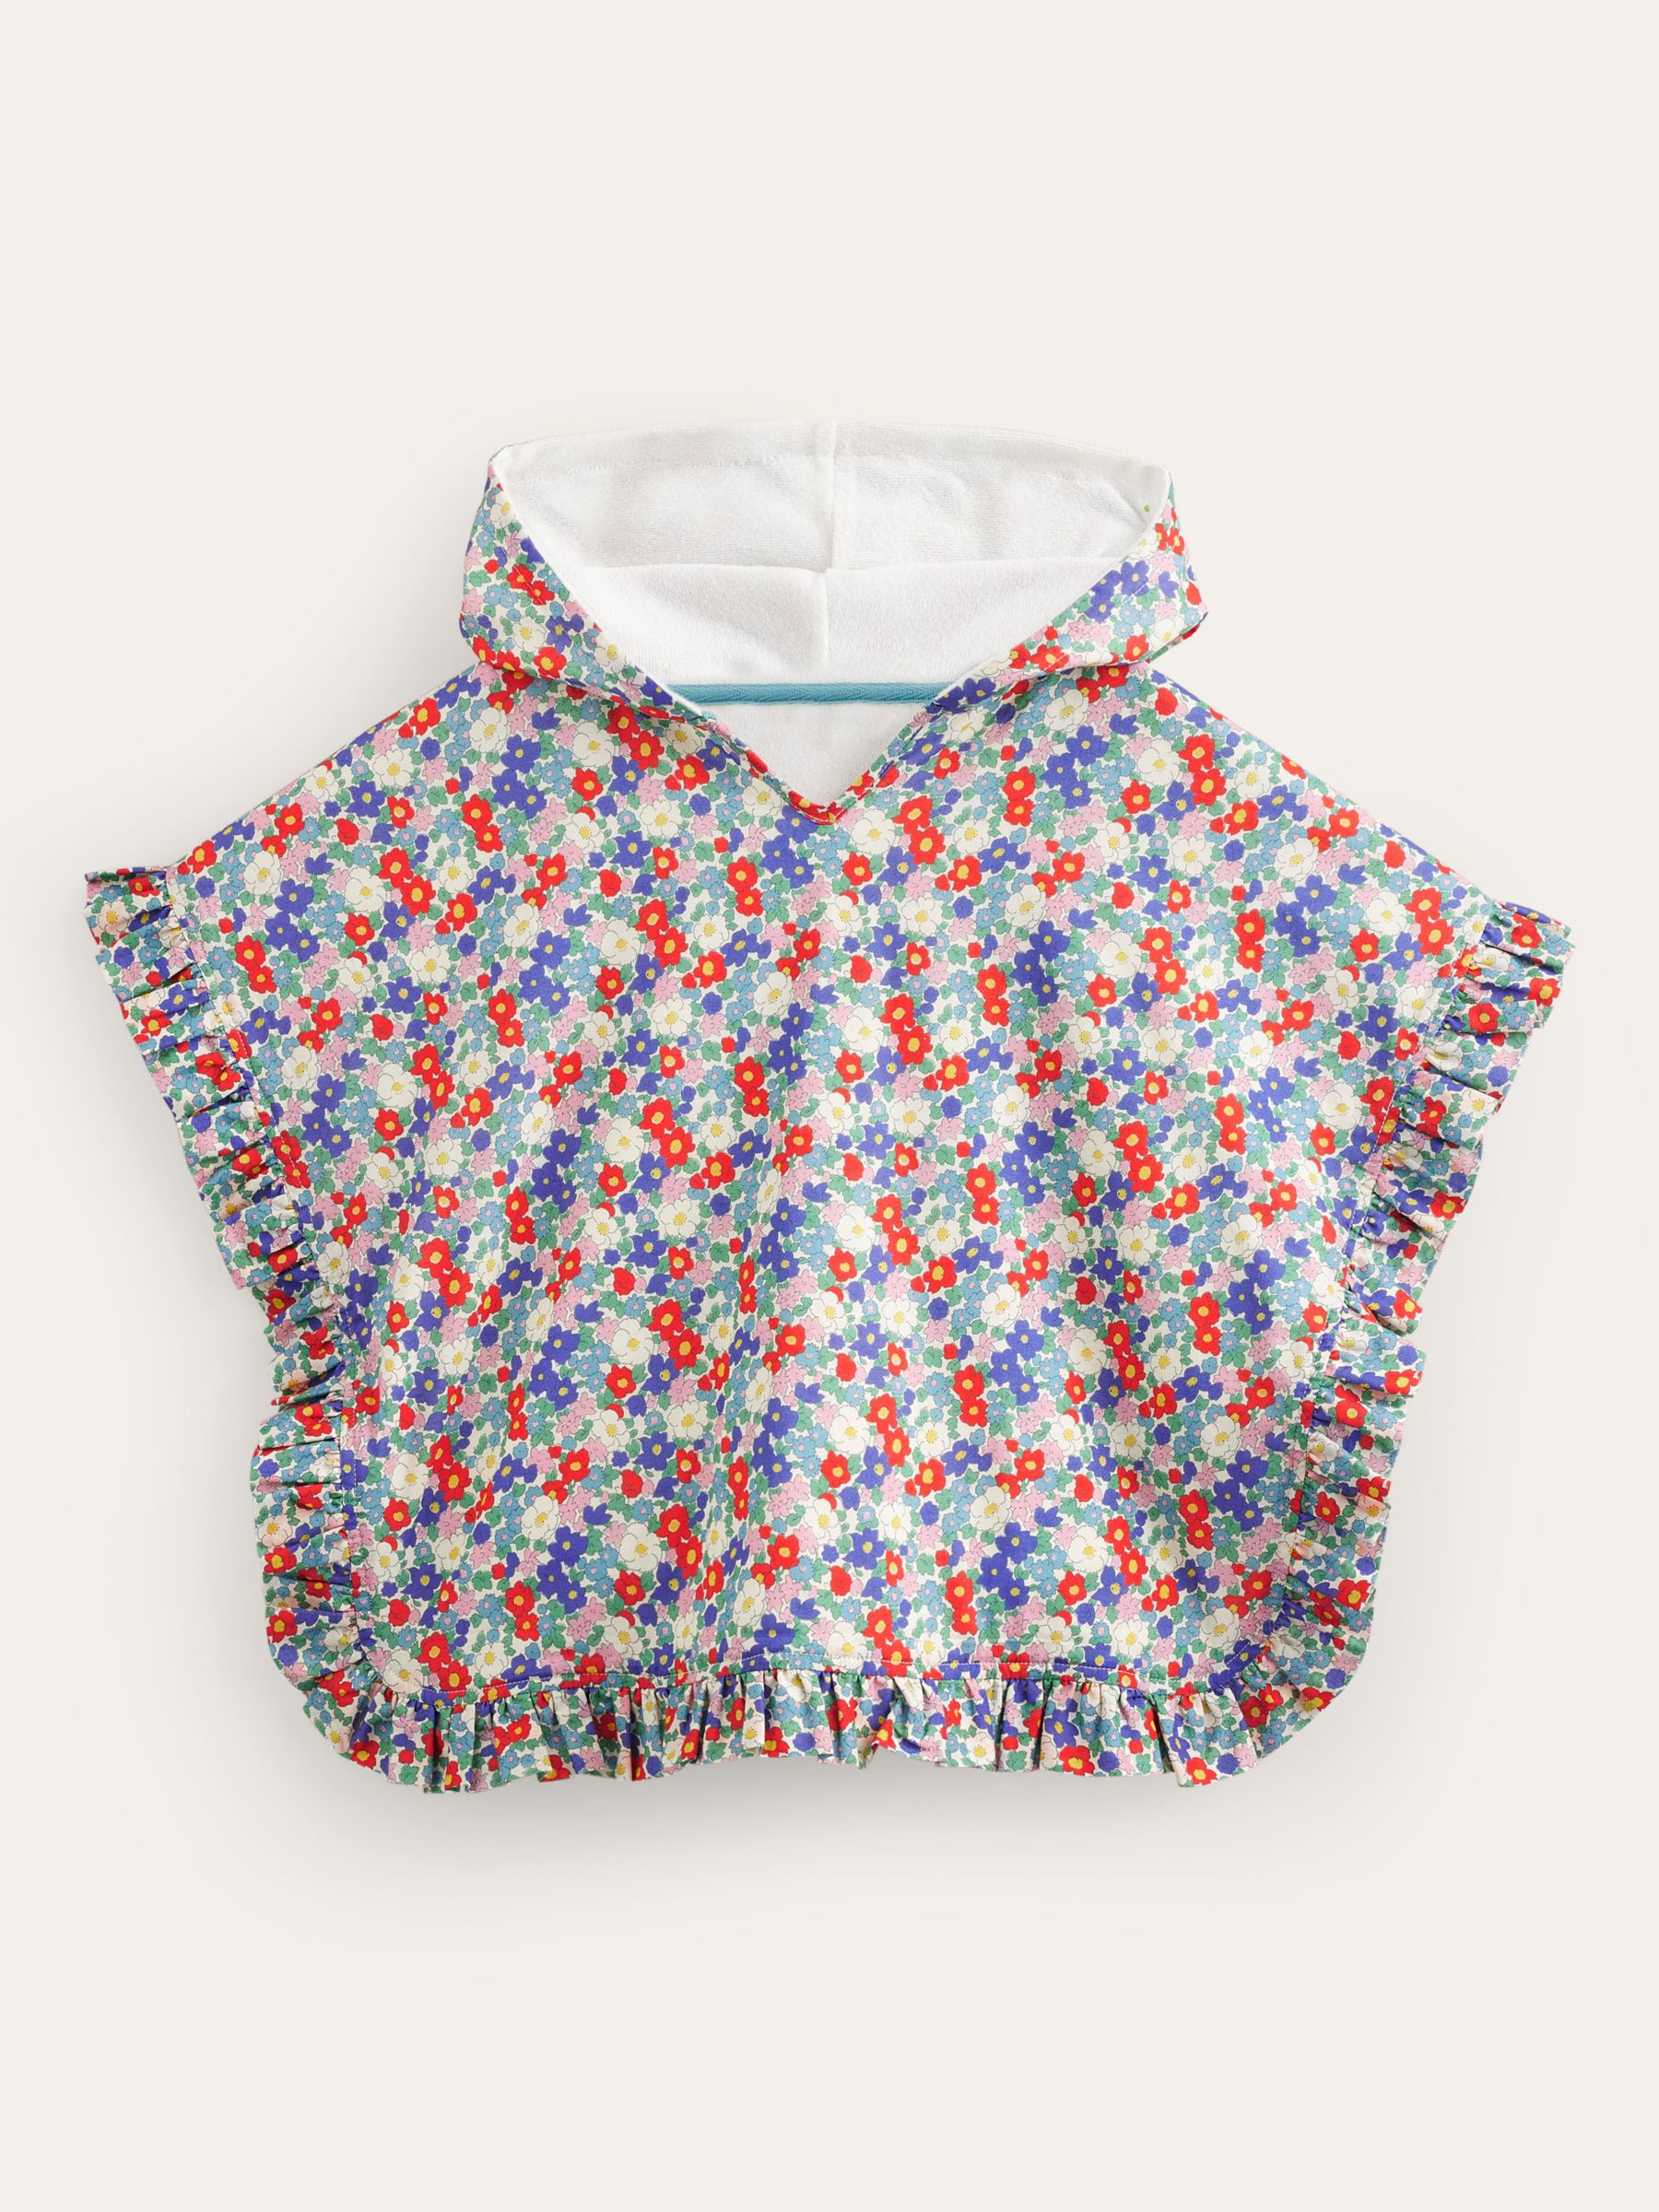 Mini Boden Kids' Floral Towelling Hoodie Poncho, Nautical Floral, L